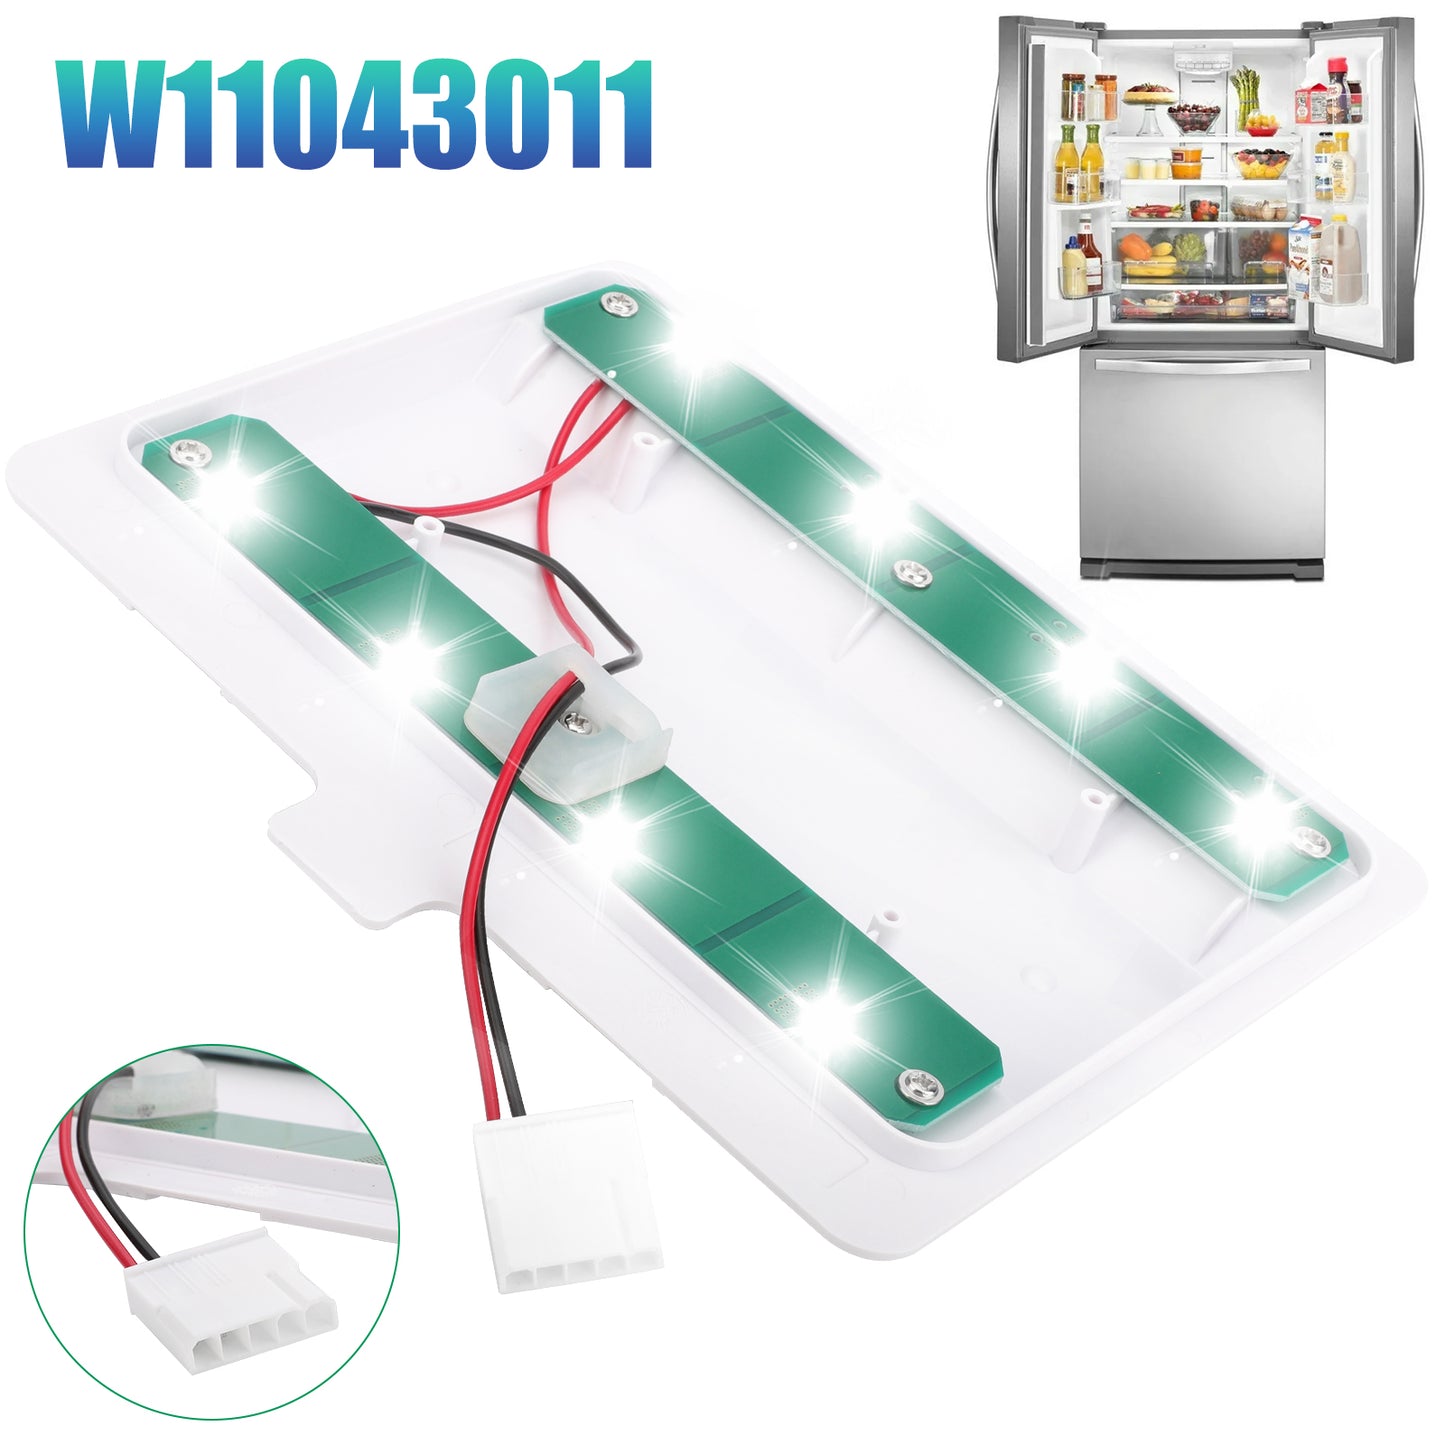 W11043011 Replacement LED Module For Whirlpool